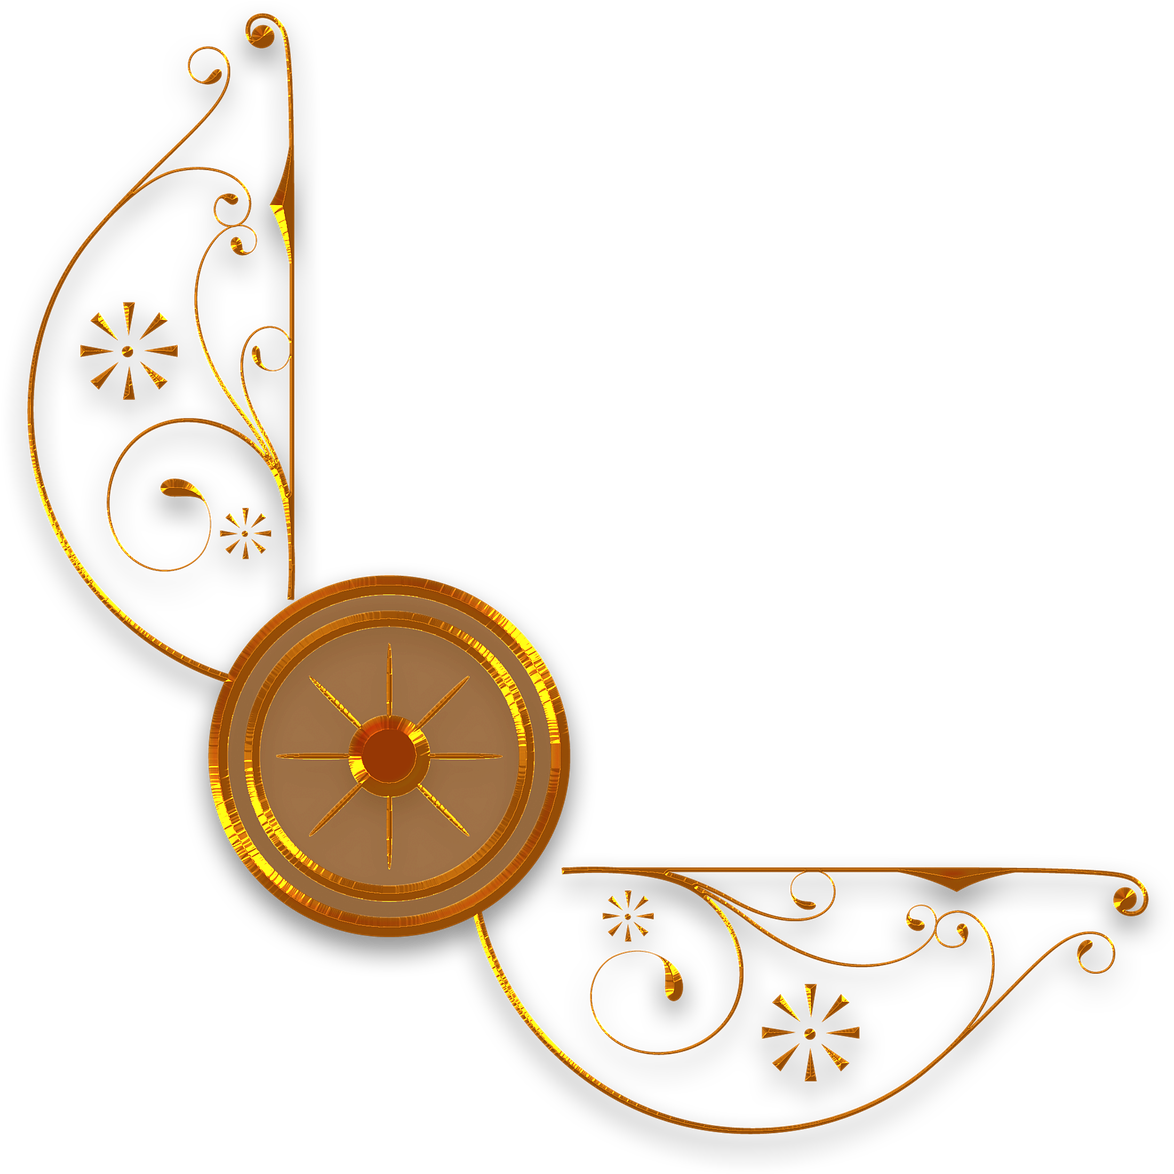 A Gold And Black Corner With A Circle And Flower Design